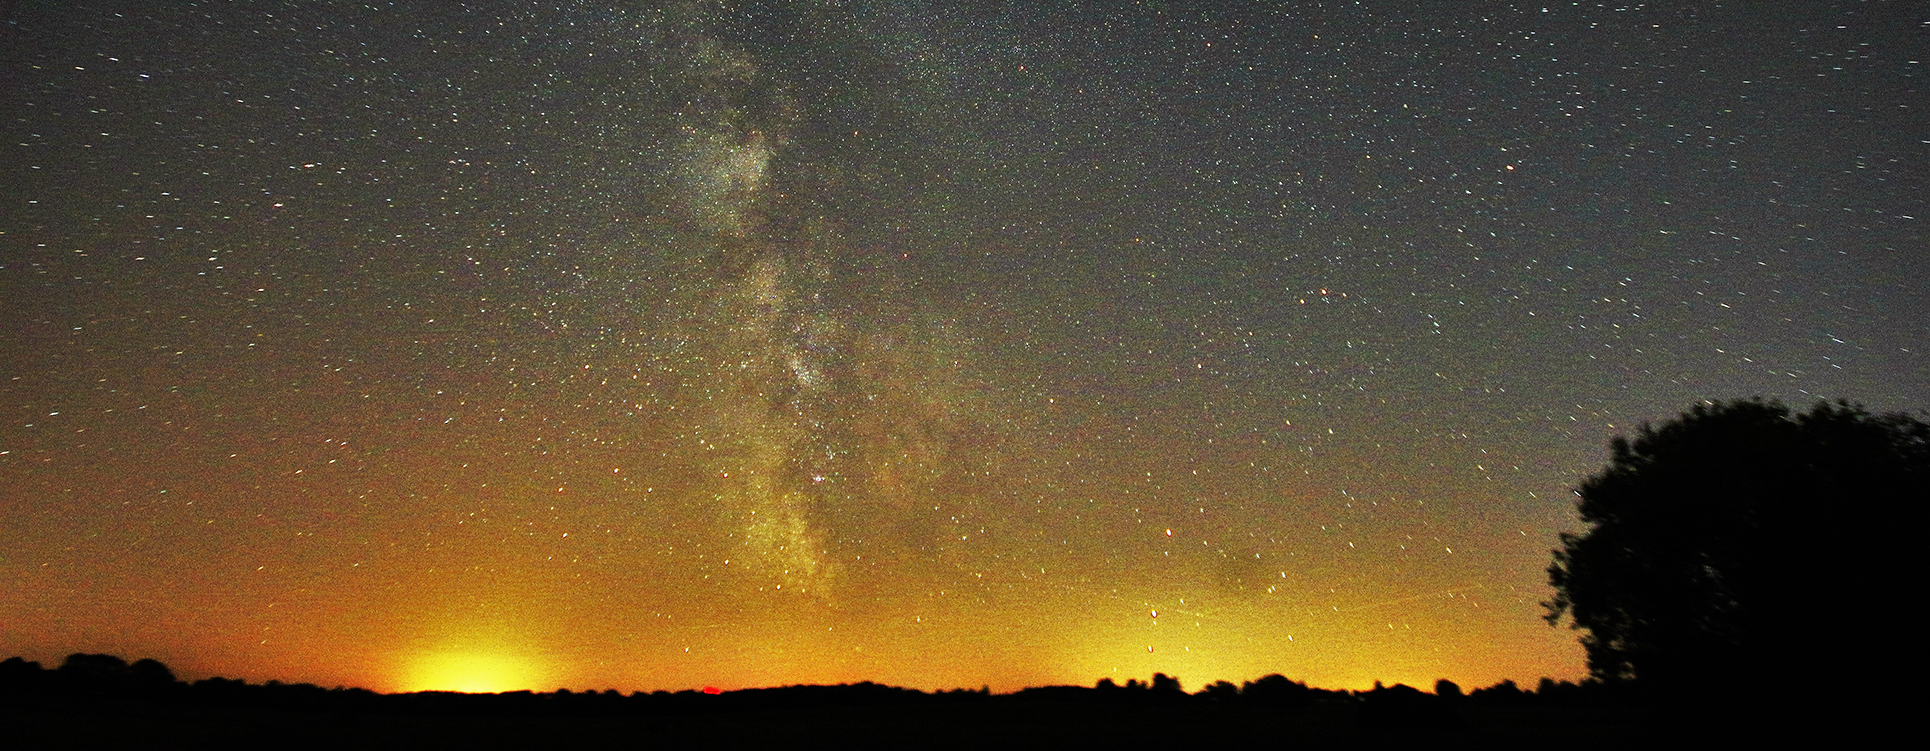 Milky Way photographed with Pentax and O-GPS2